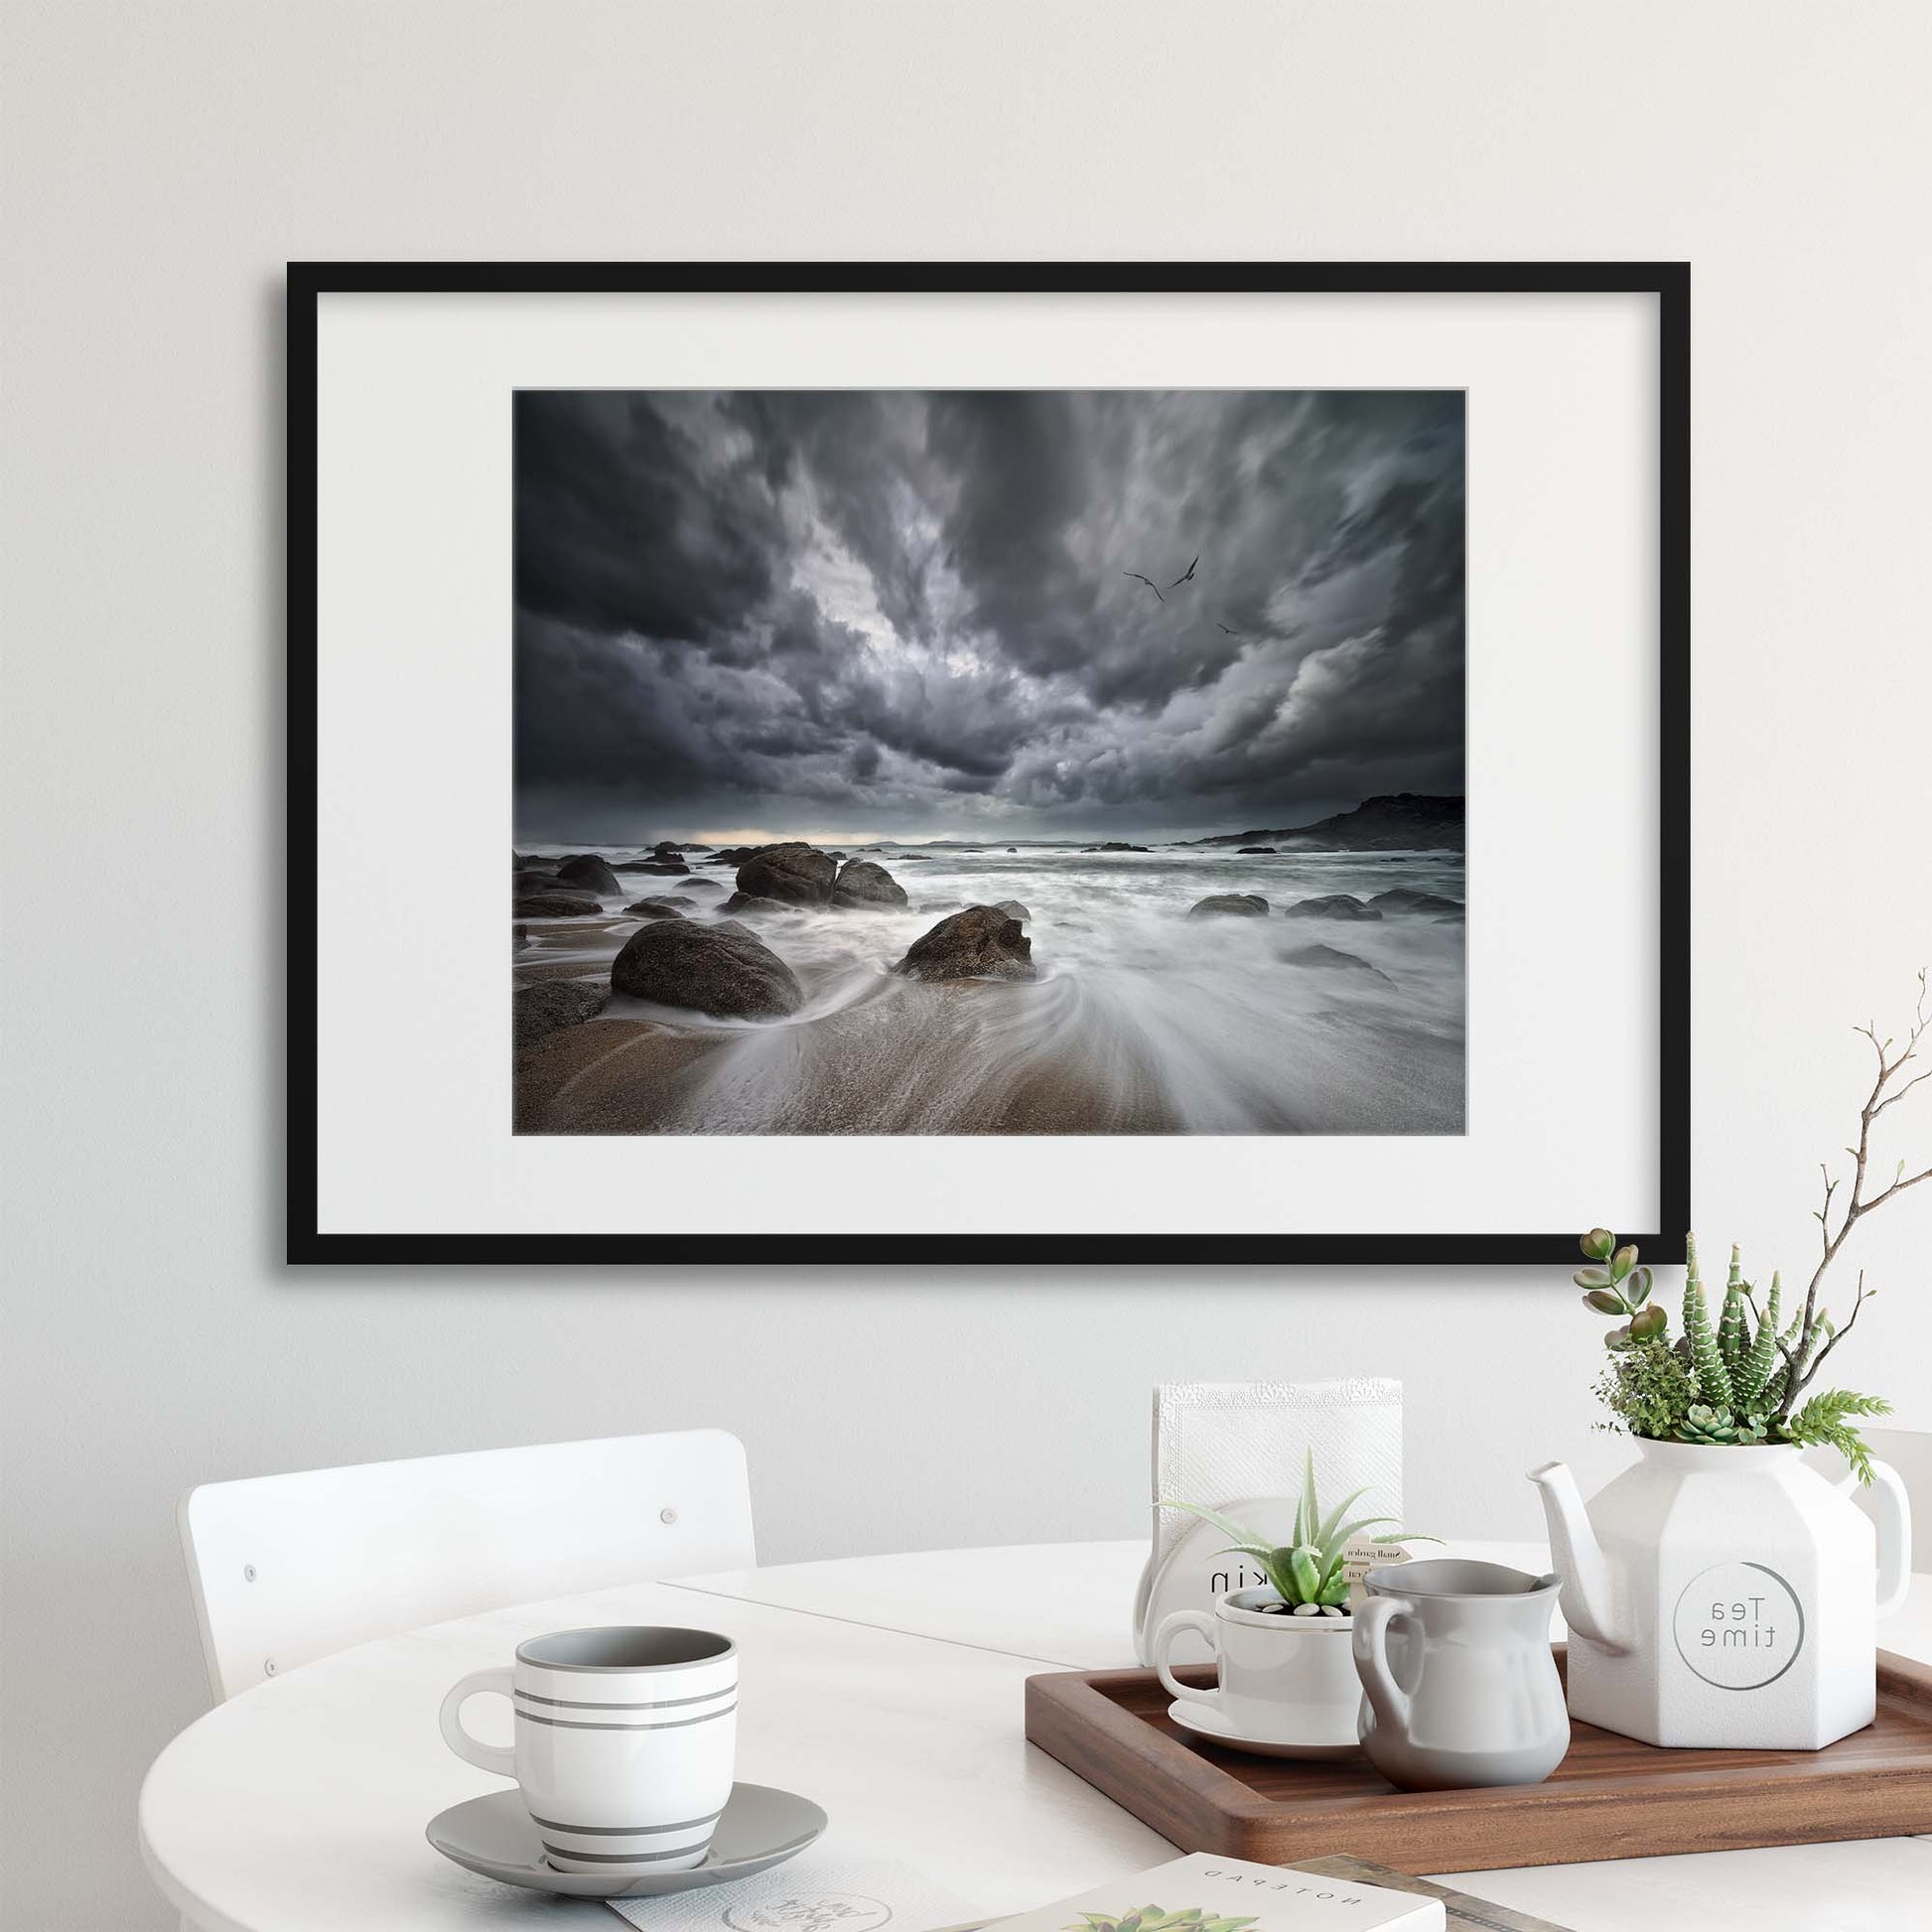 Flight over Troubled Waters by Santiago Pascual Buye Framed Print - USTAD HOME